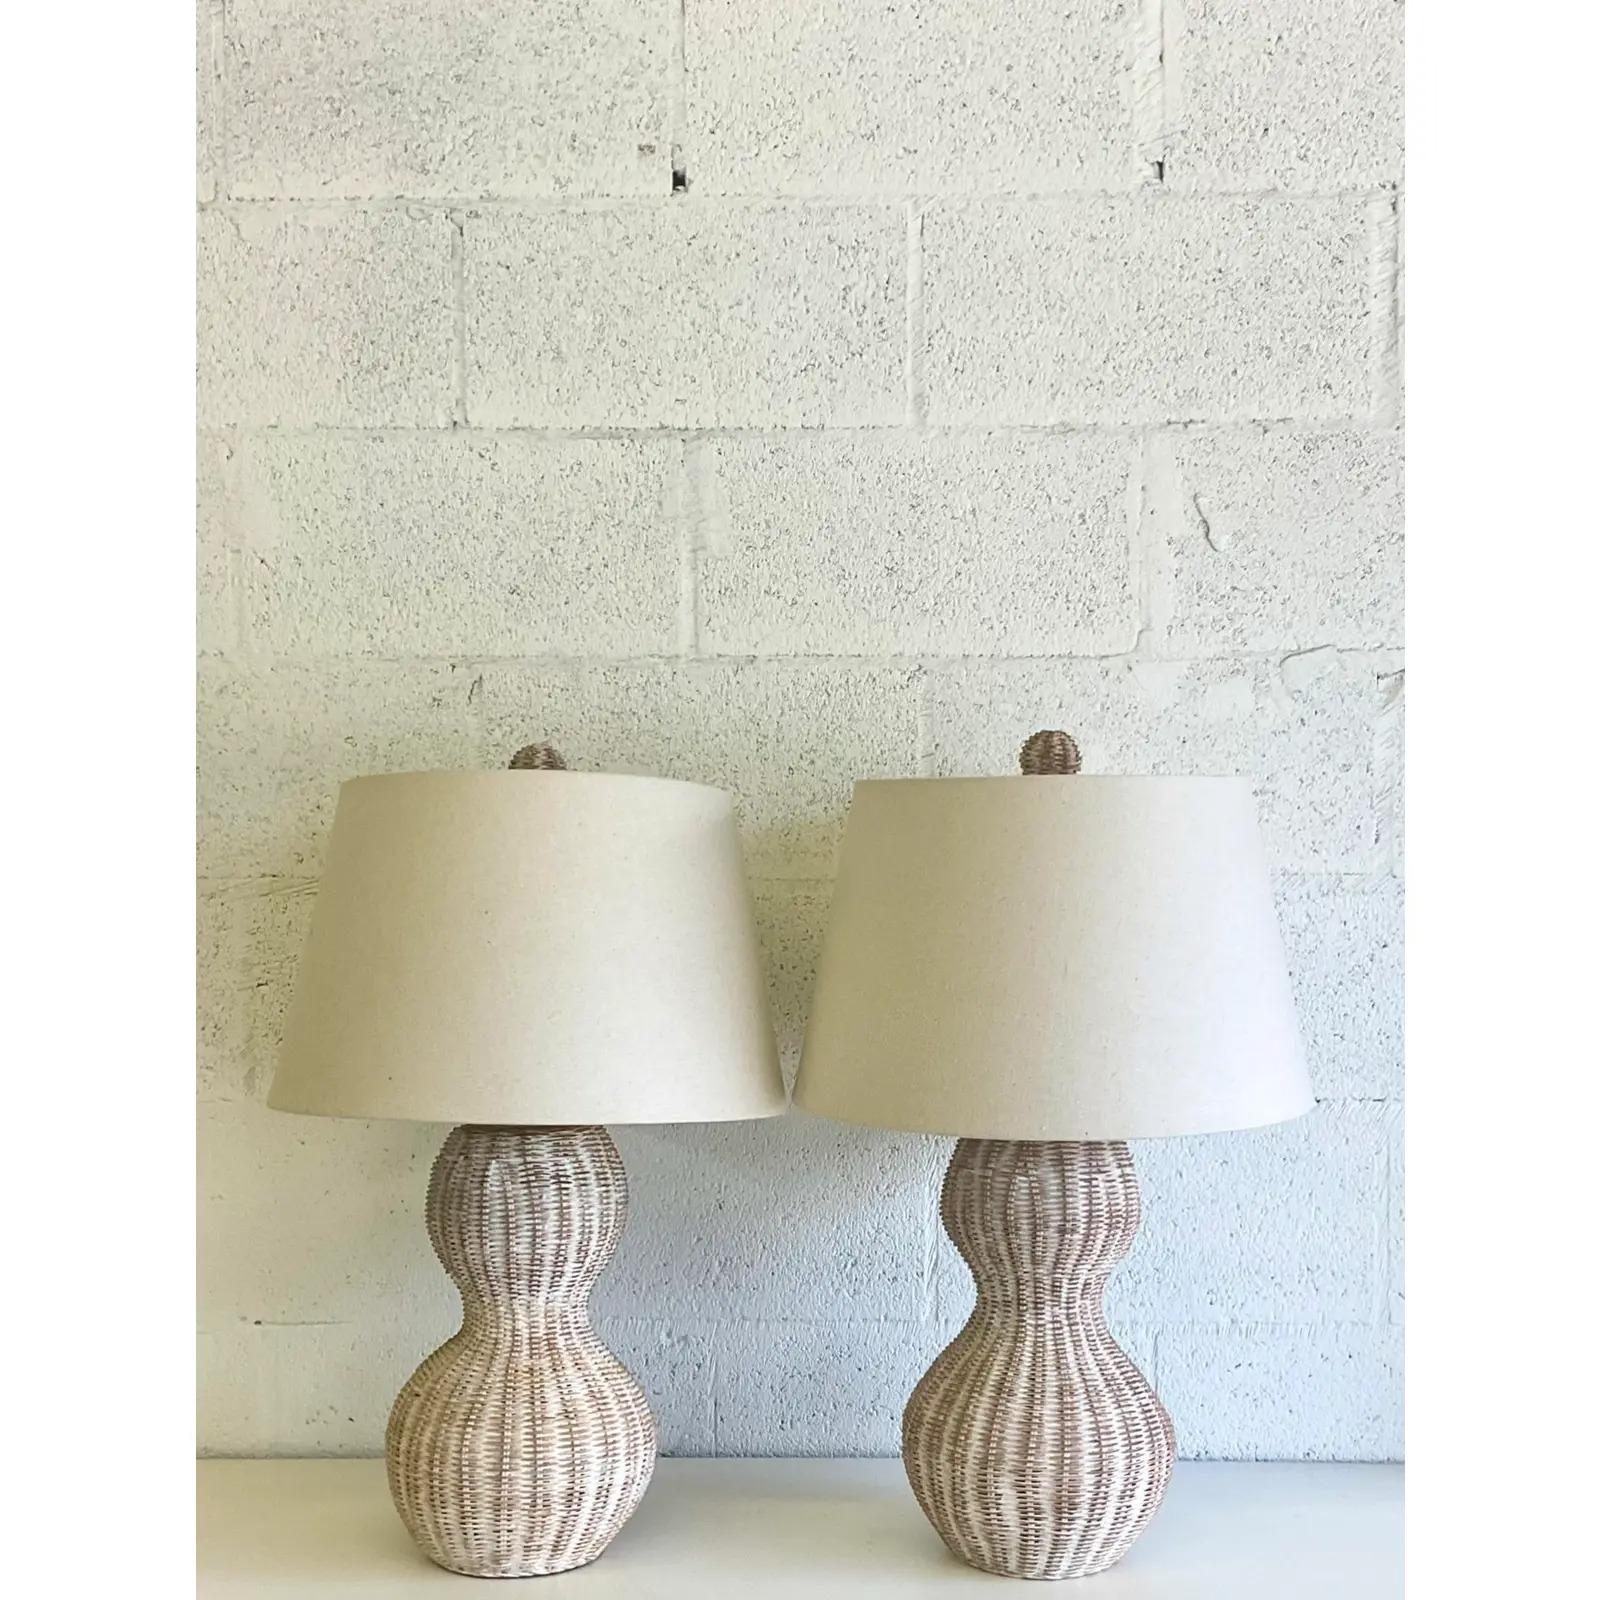 North American Vintage Coastal Cerused Woven Rattan Lamps, a Pair